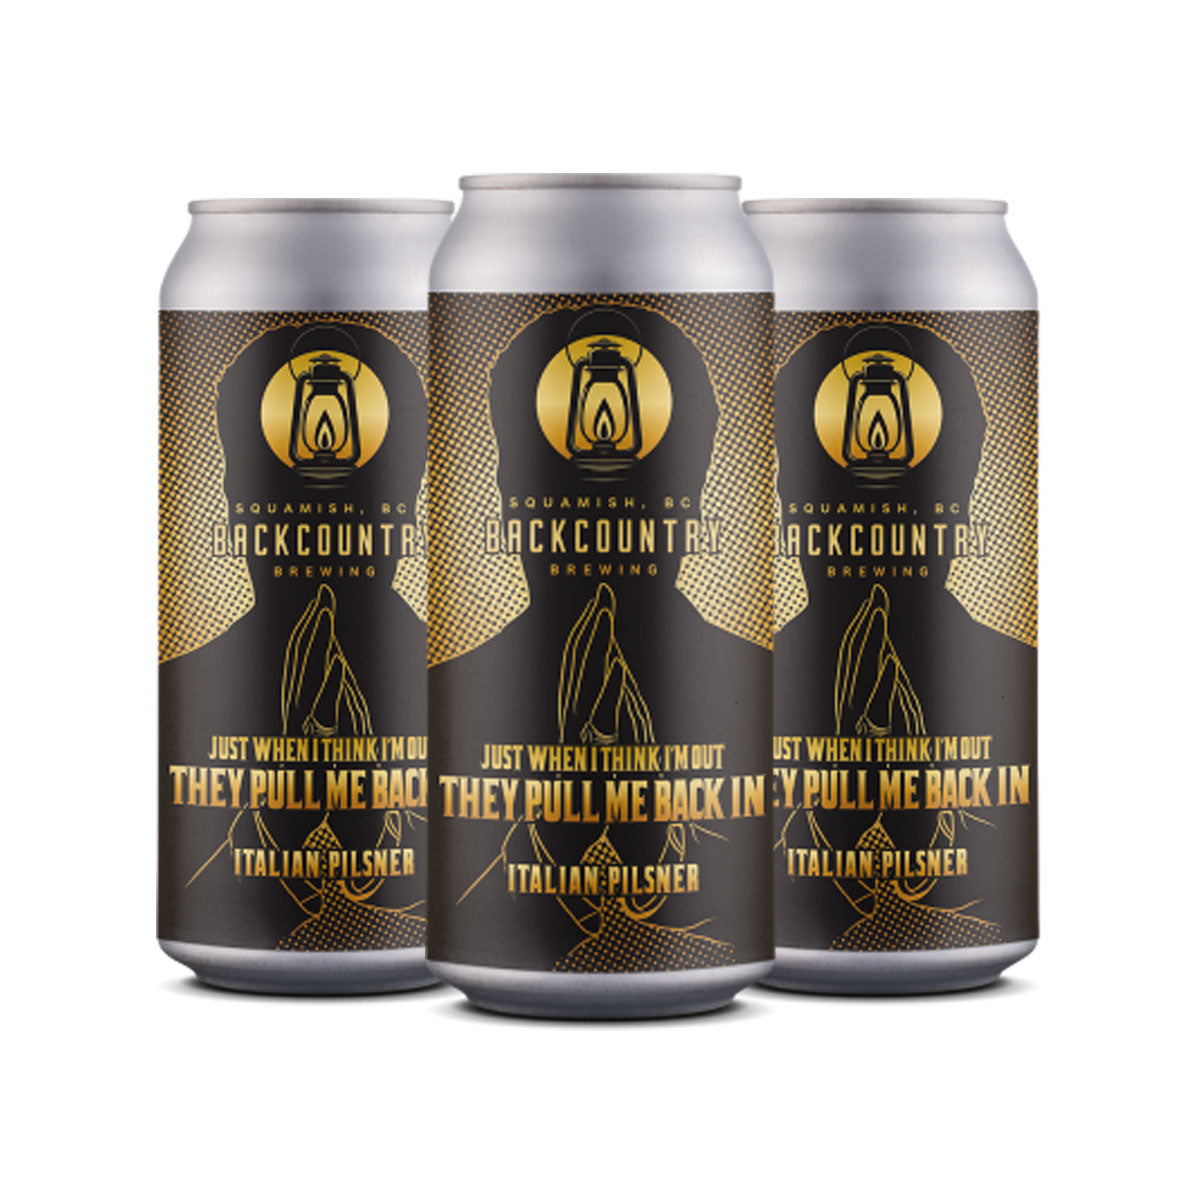 TAG Liquor Stores BC - Backcountry Brewing "Just When I Think I'm Out They Pull Me Back In" Italian Pilsner 4 Pack Cans